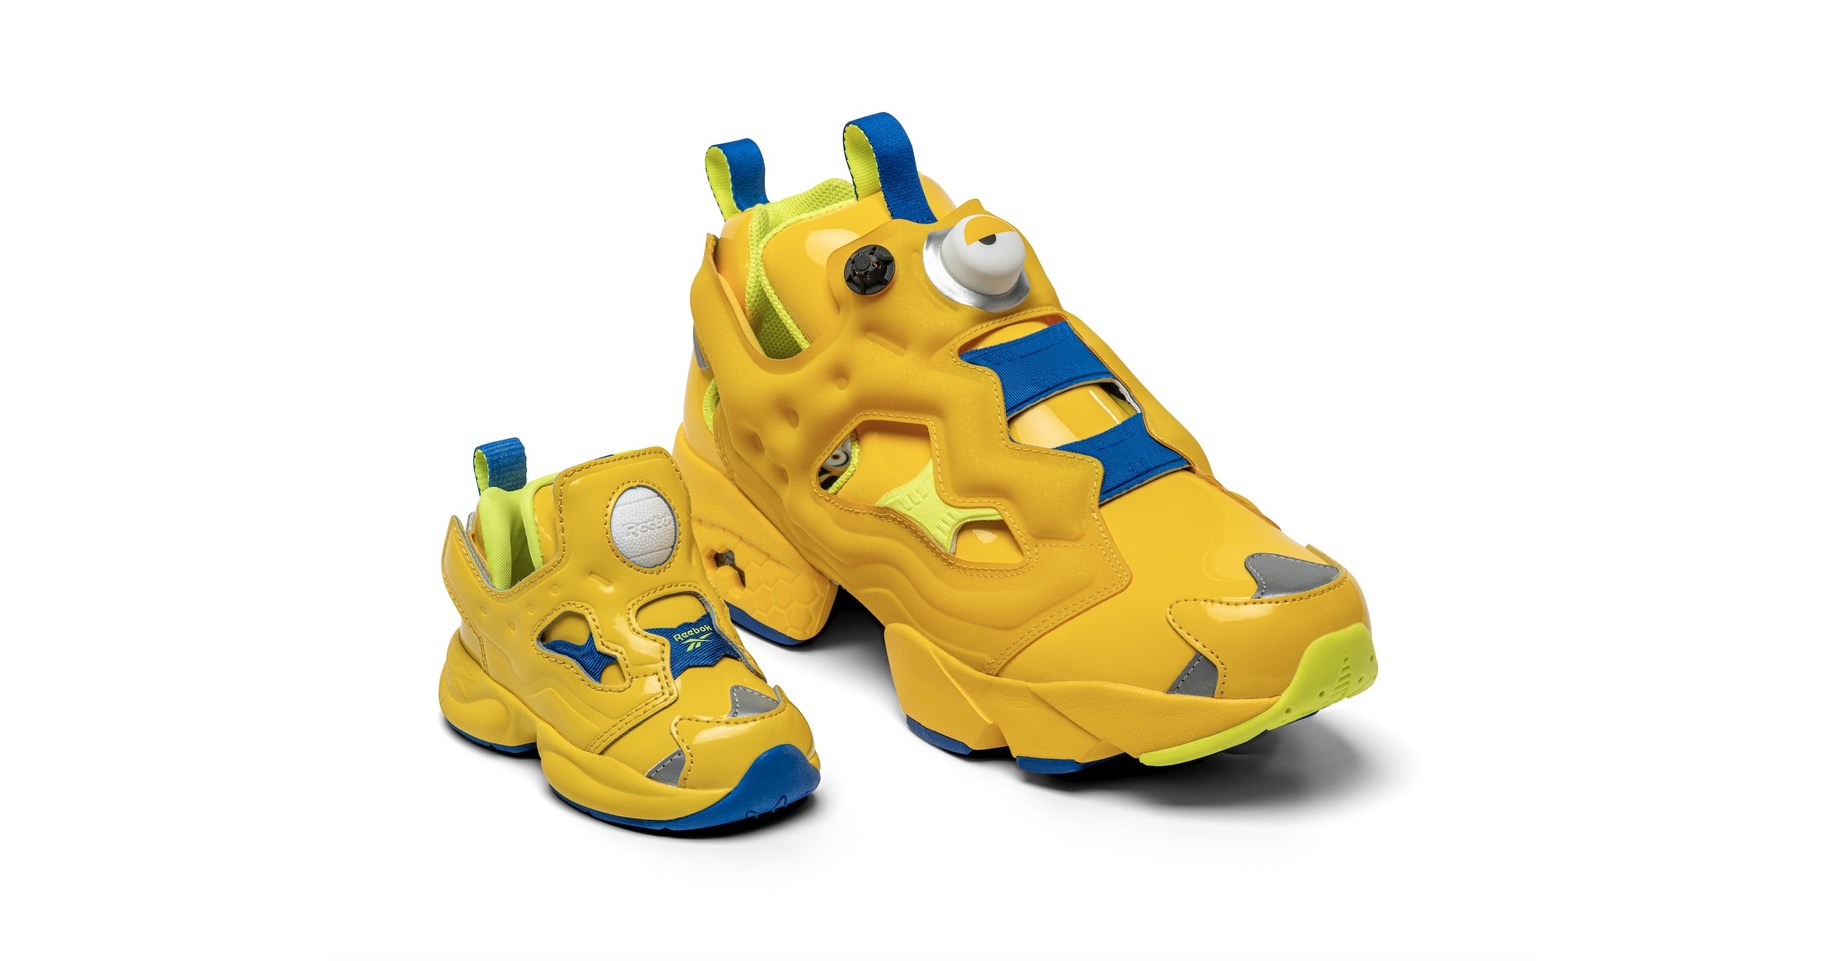 Reebok And Illumination Present "Minions: The Rise Of Gru" Collection Detailing A Young Of Becoming The World's Greatest Supervillain, October 1